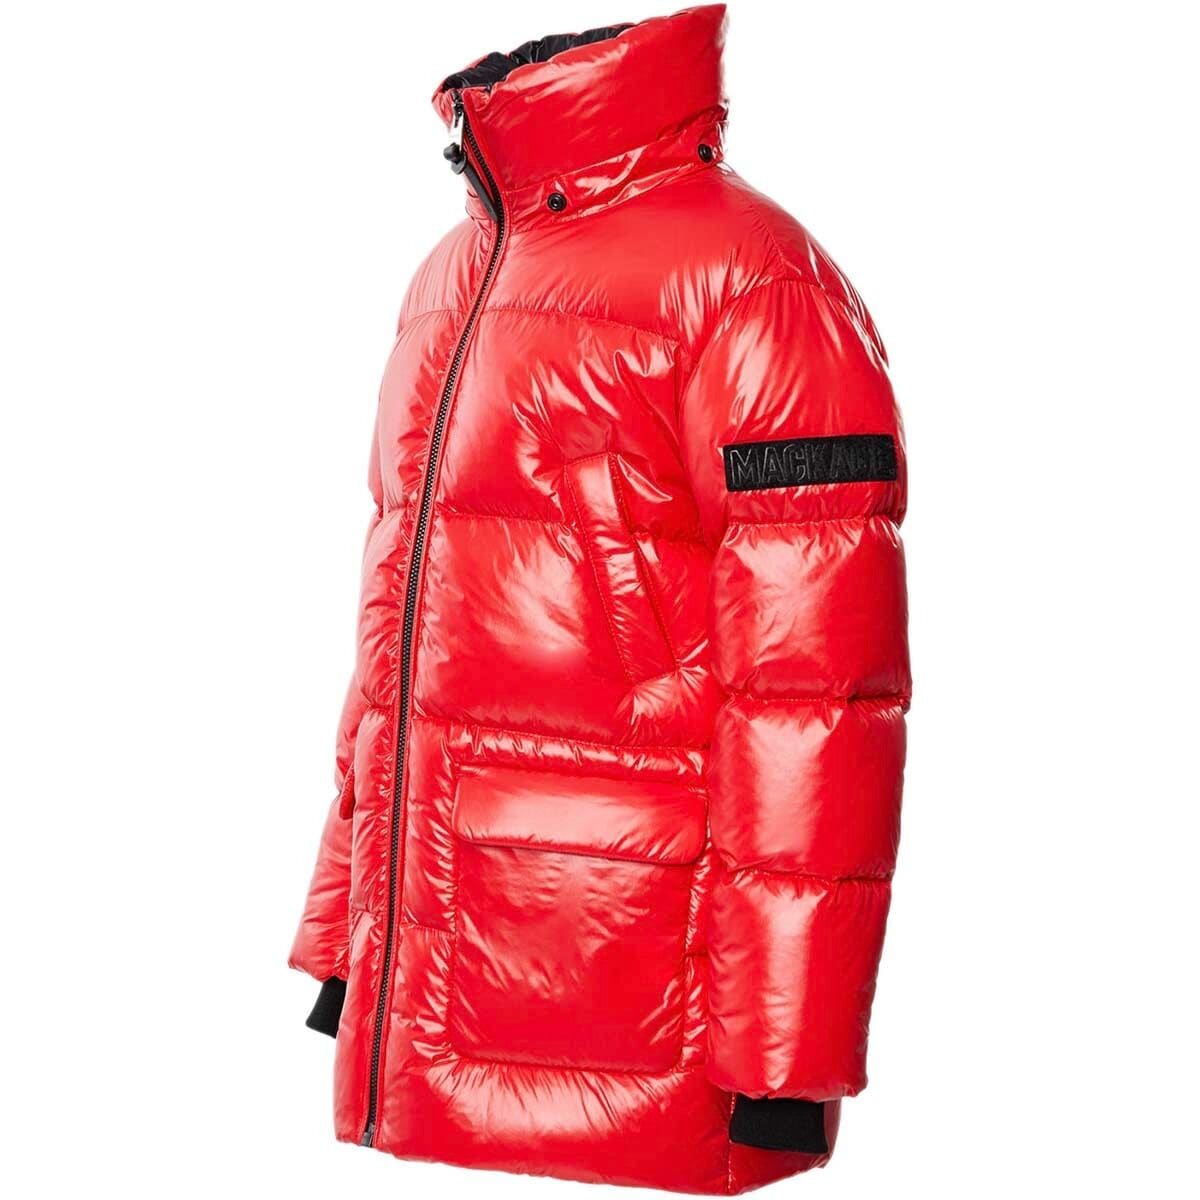 Mackage Kennie Down Jacket - Toddlers' | Backcountry.com